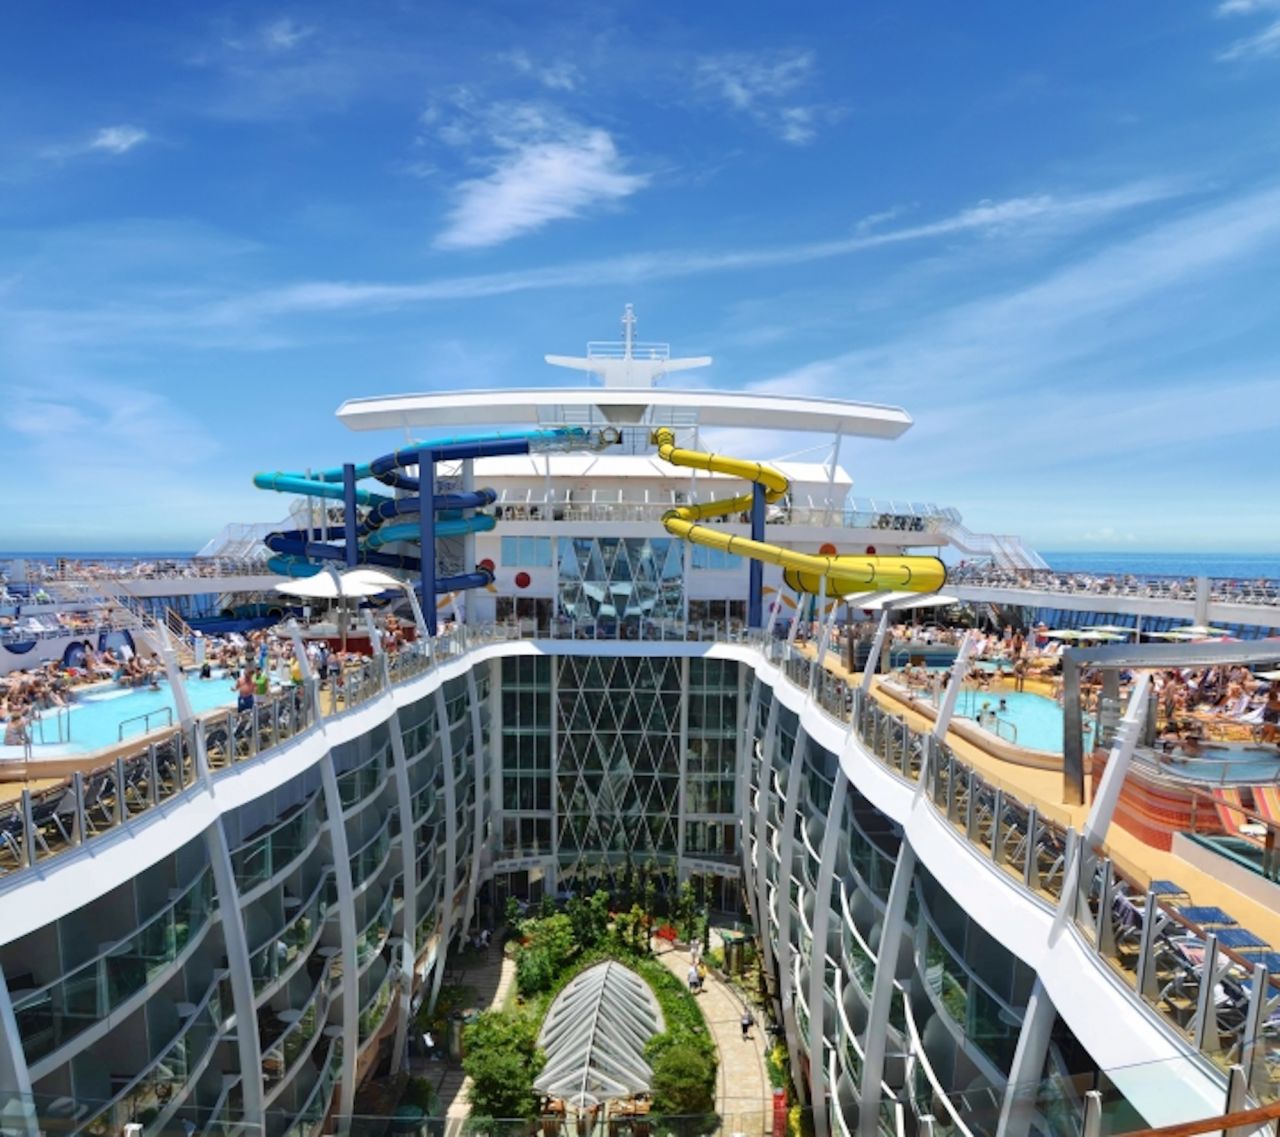 Stretching 1,187 feet, Royal Caribbean's Harmony of the Seas will soon be the largest ship sailing the globe. Along with towering water slides are water cannons, a drench bucket, multi-platform jungle gym, two climbing walls, a zip line and ice skating rink.  